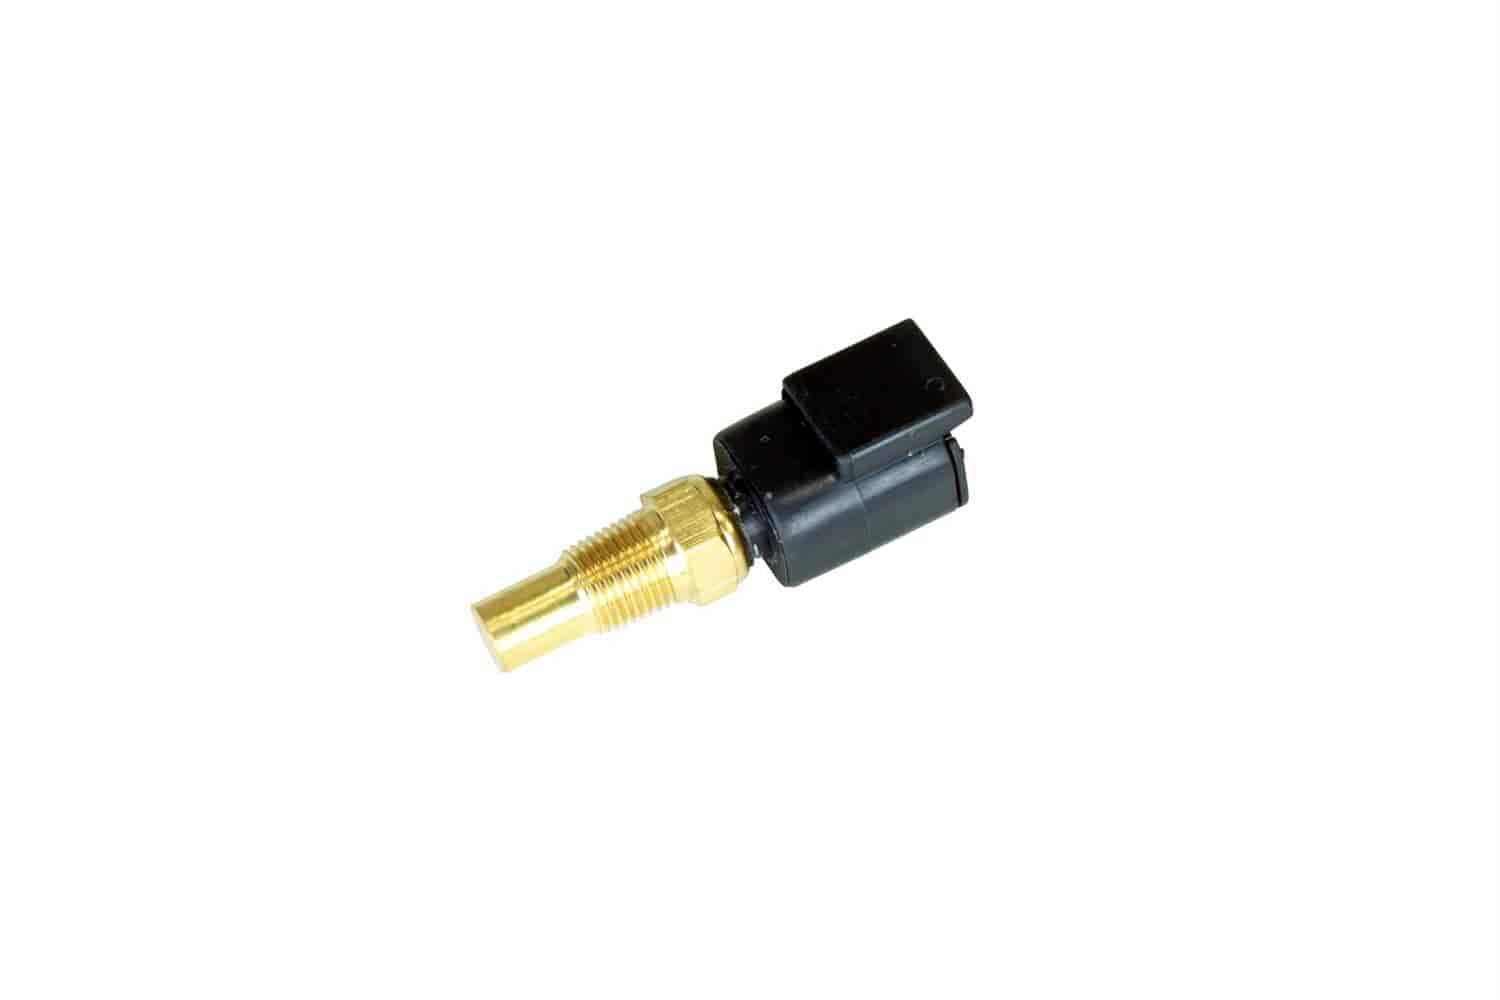 Water Temperature Sensor DTM-Style Kit Includes: 1/8" NPT Temperature Sensor With High Performance DTM-Style Connector